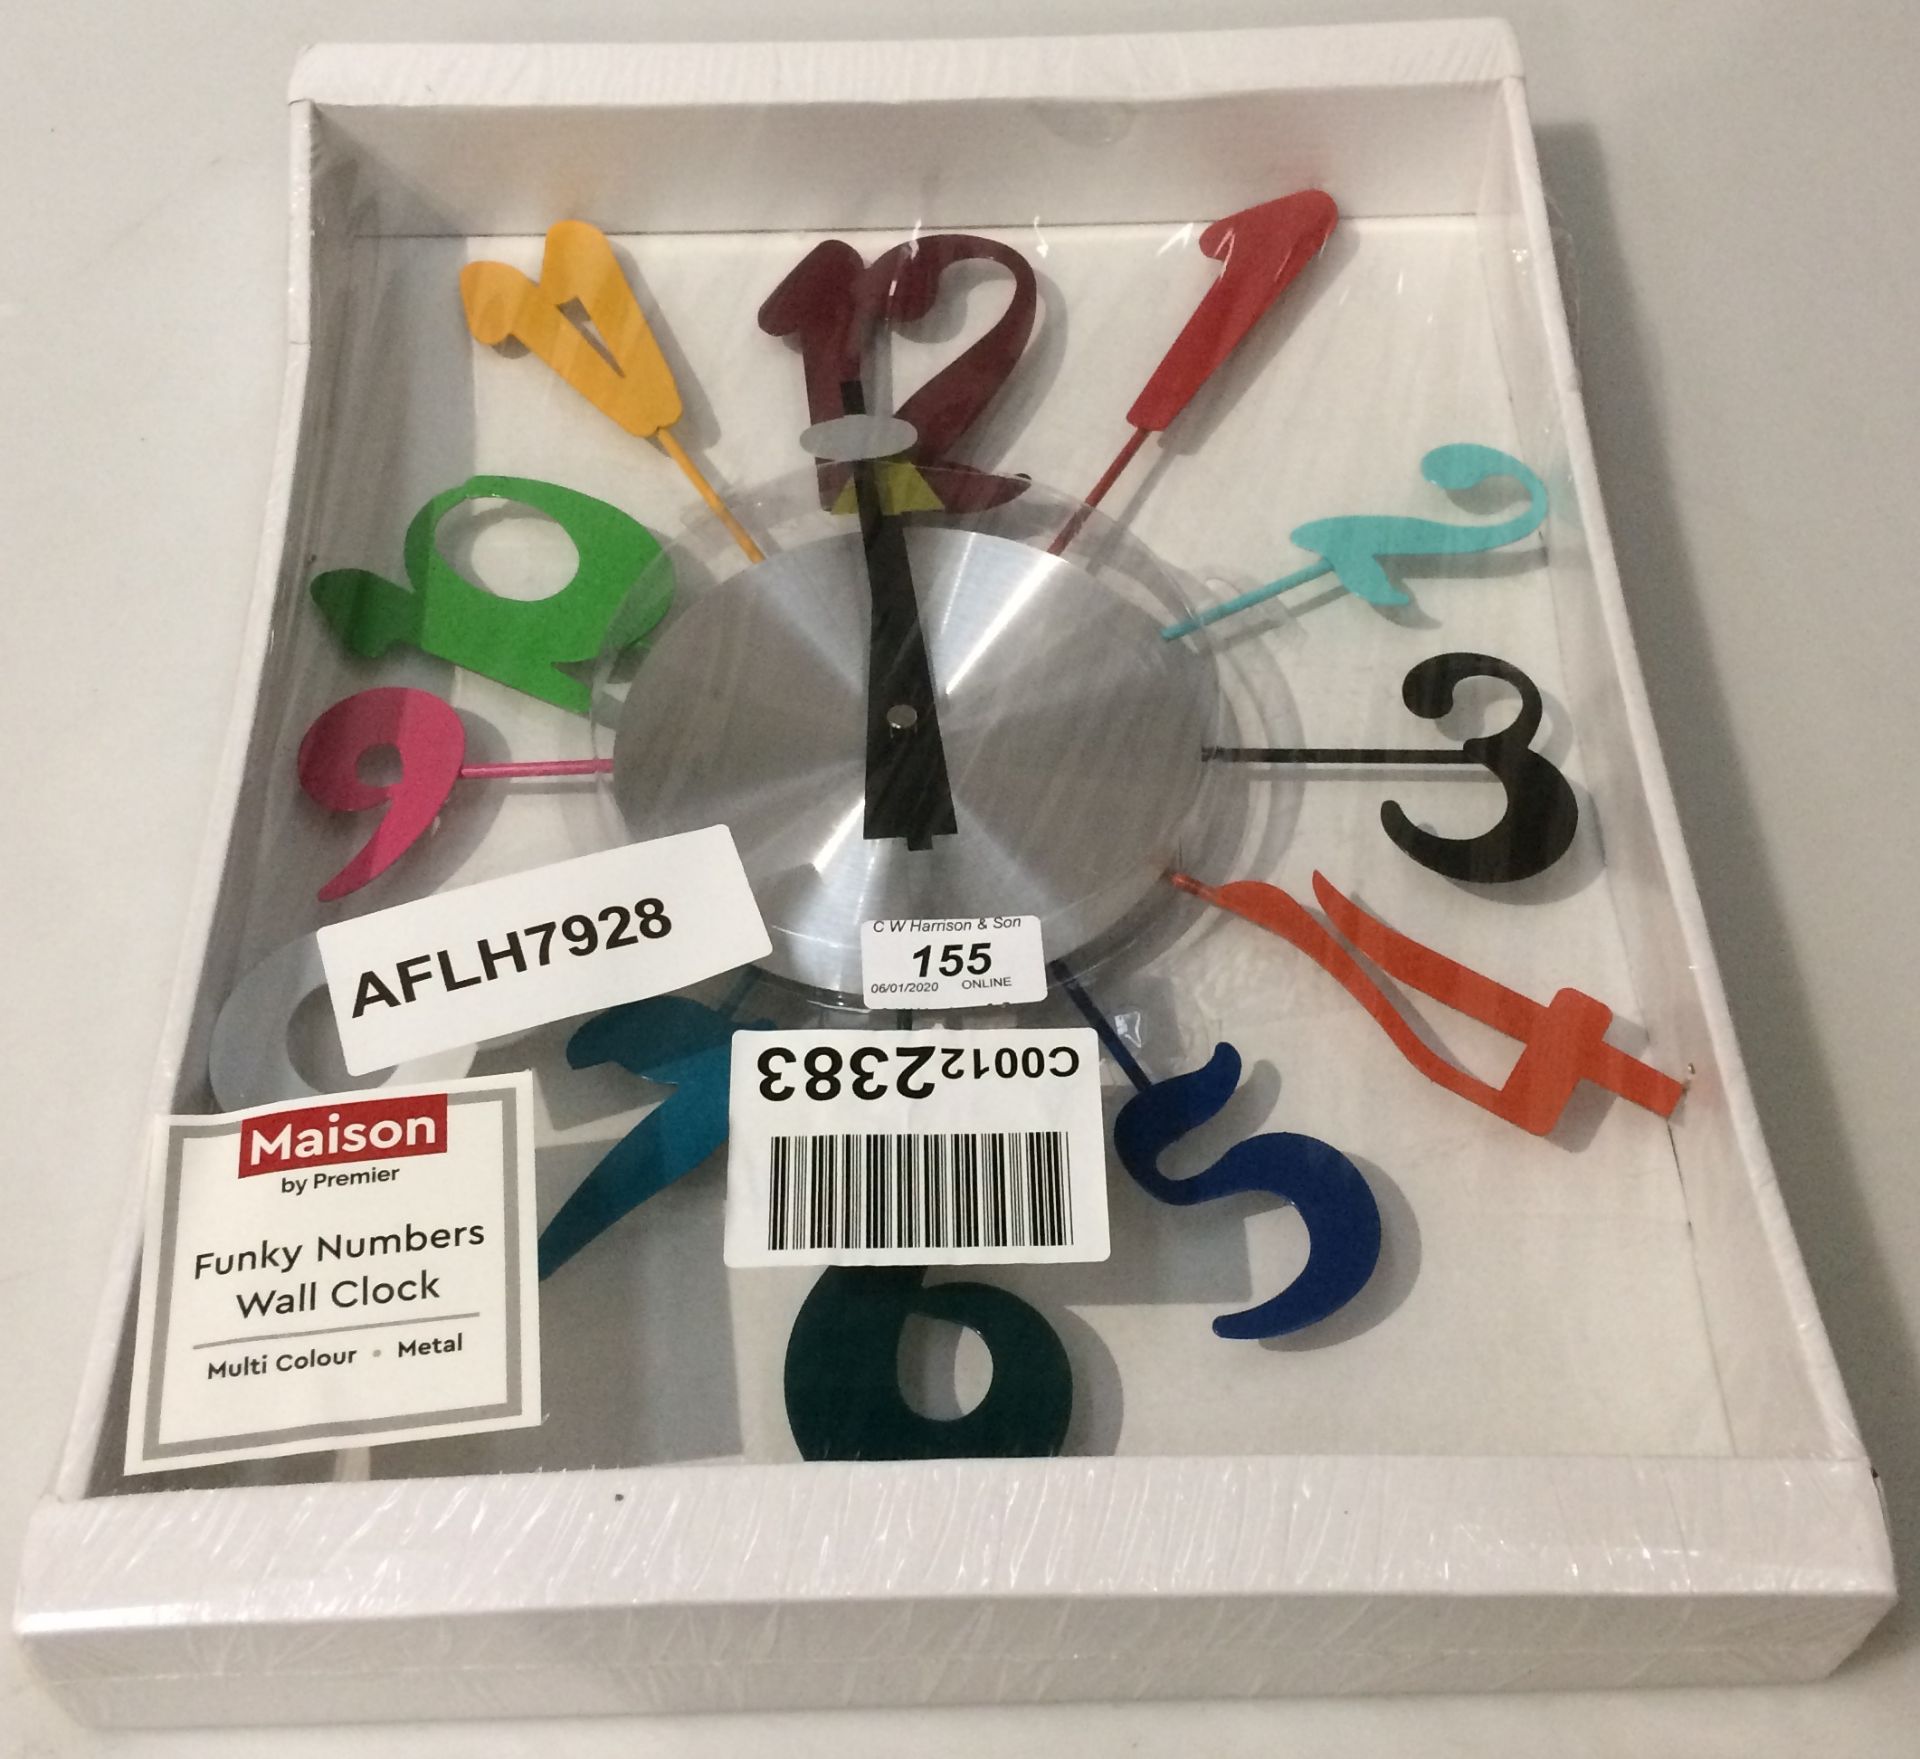 Funky Numbers Wall Clock by All Home - Image 2 of 2